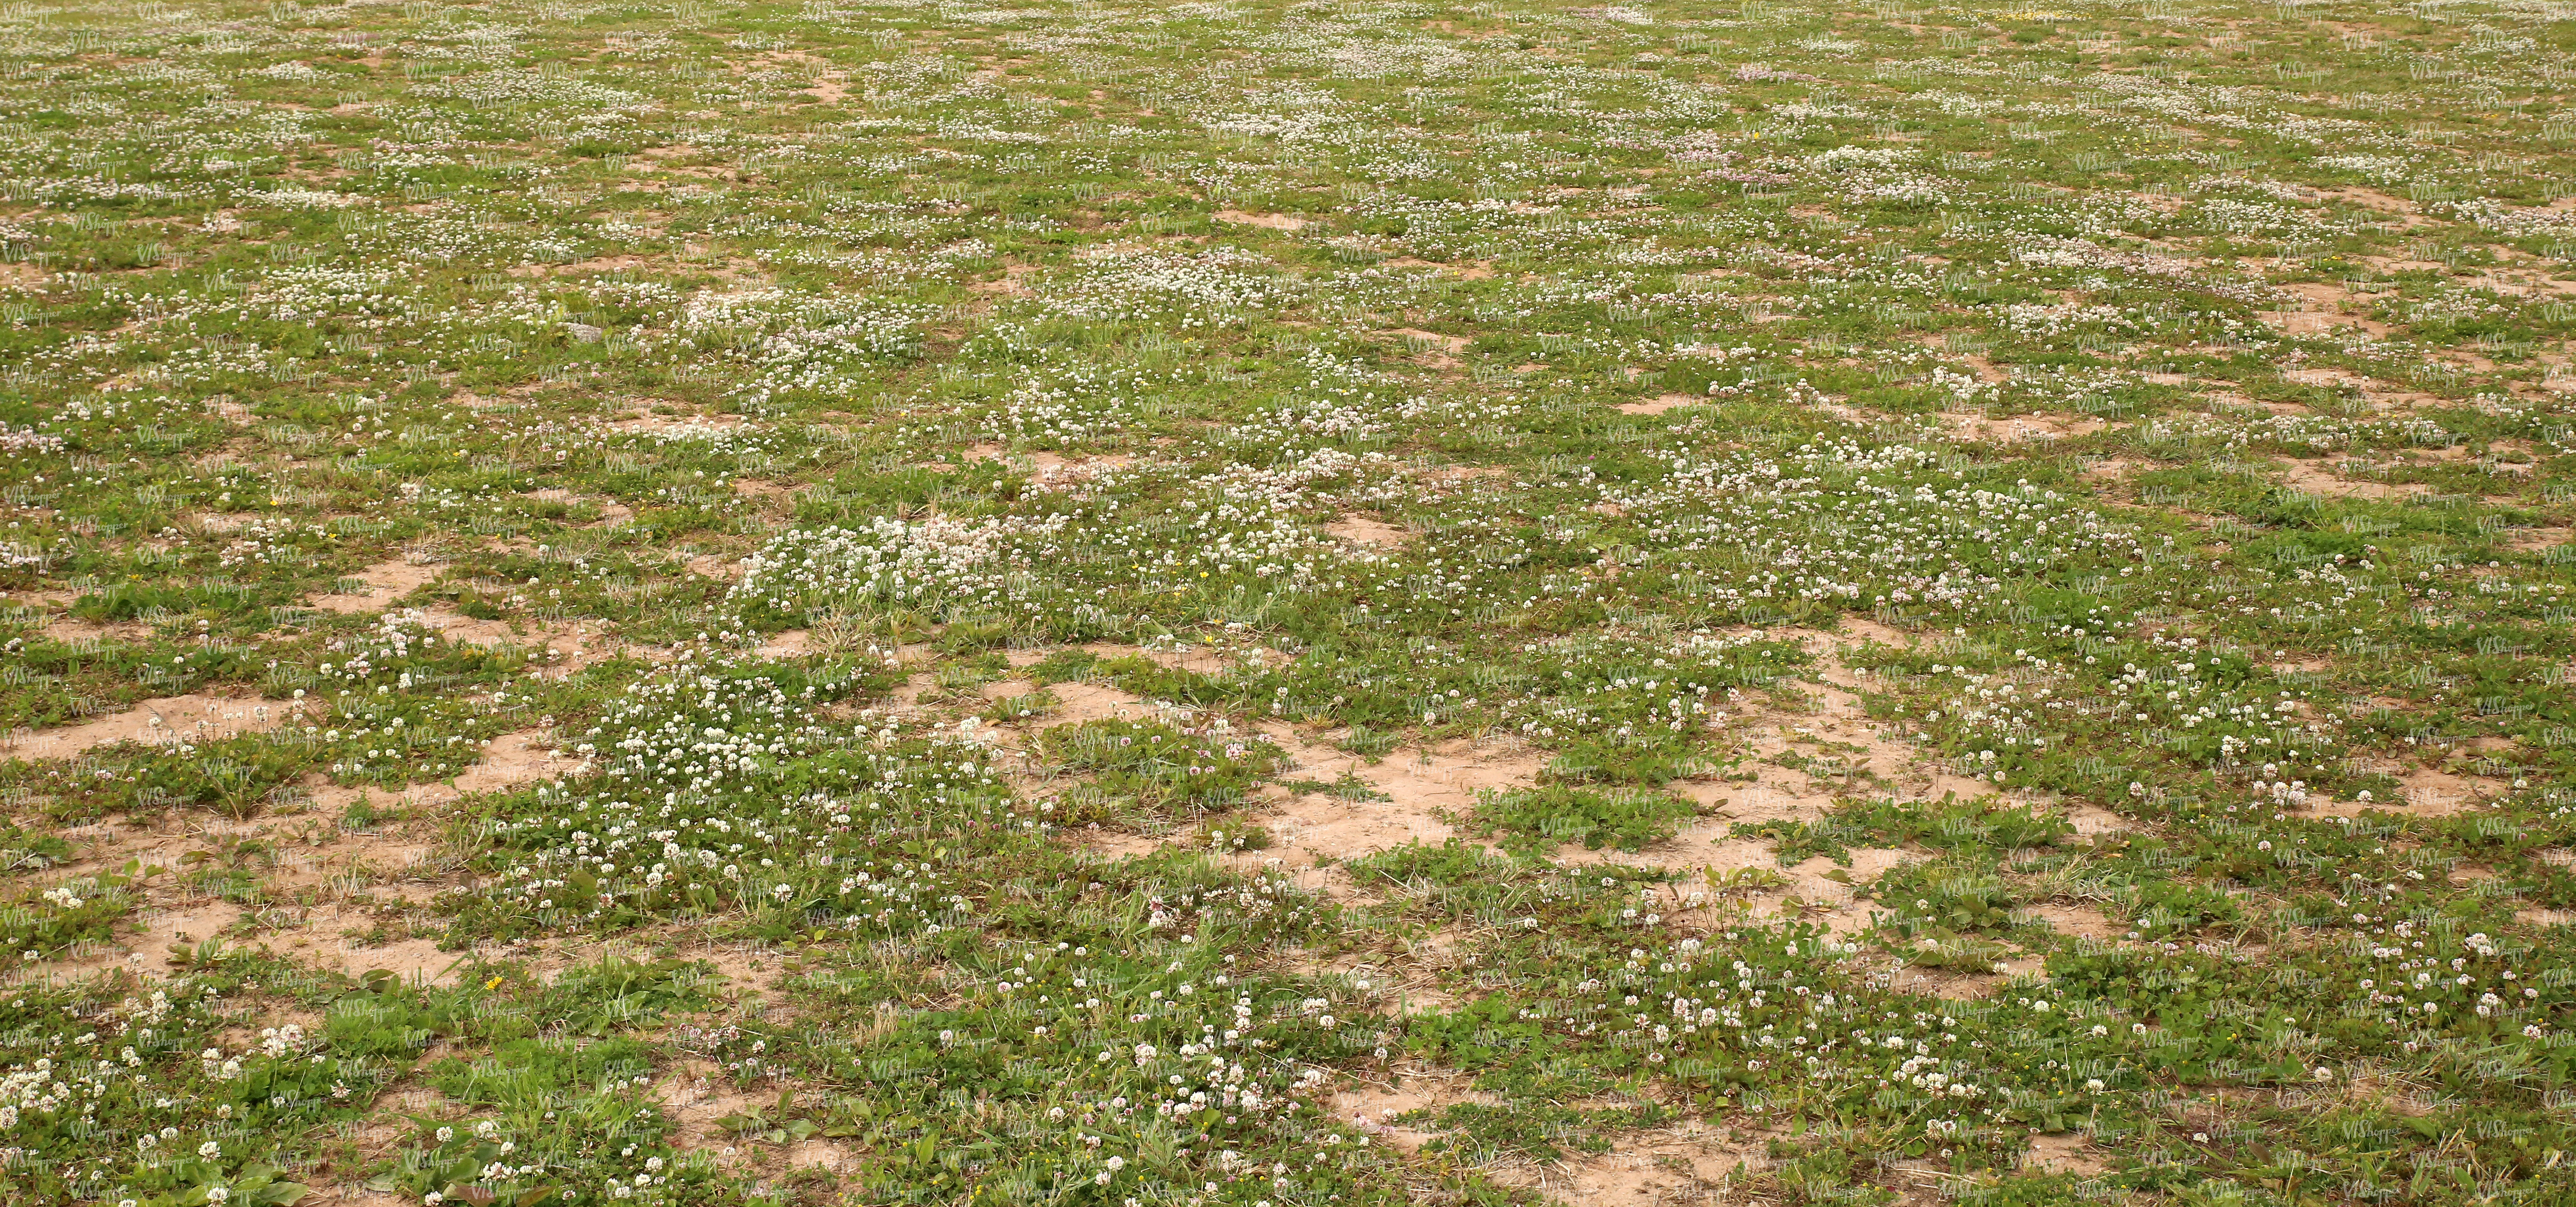 sandy ground partially covered with grass - ground textures - VIShopper